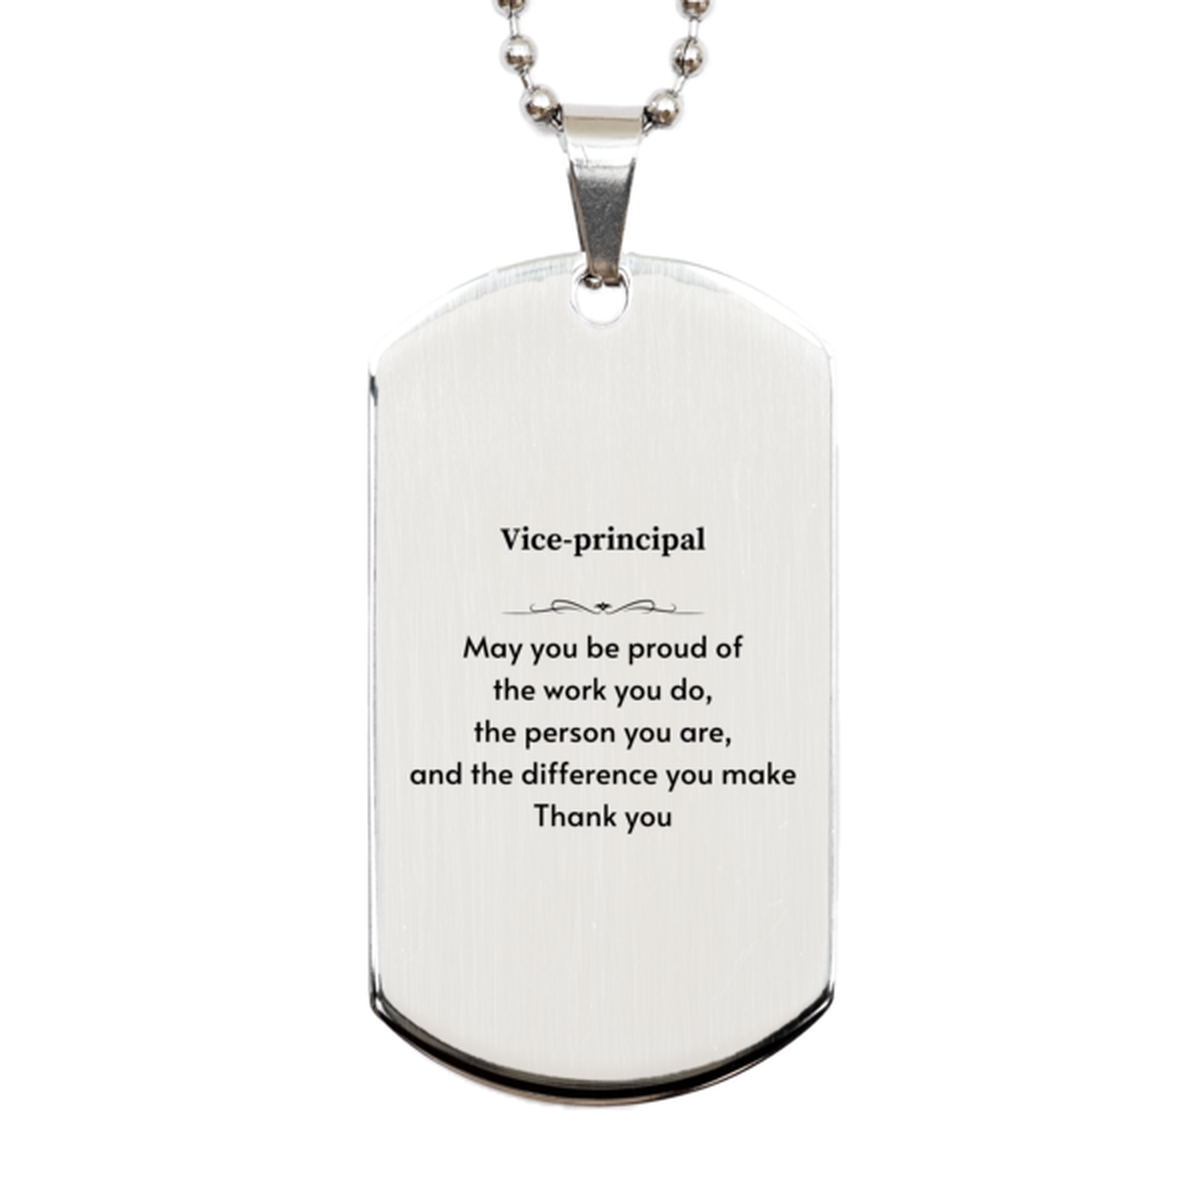 Heartwarming Silver Dog Tag Retirement Coworkers Gifts for Vice-principal, Vice-principal May You be proud of the work you do, the person you are Gifts for Boss Men Women Friends